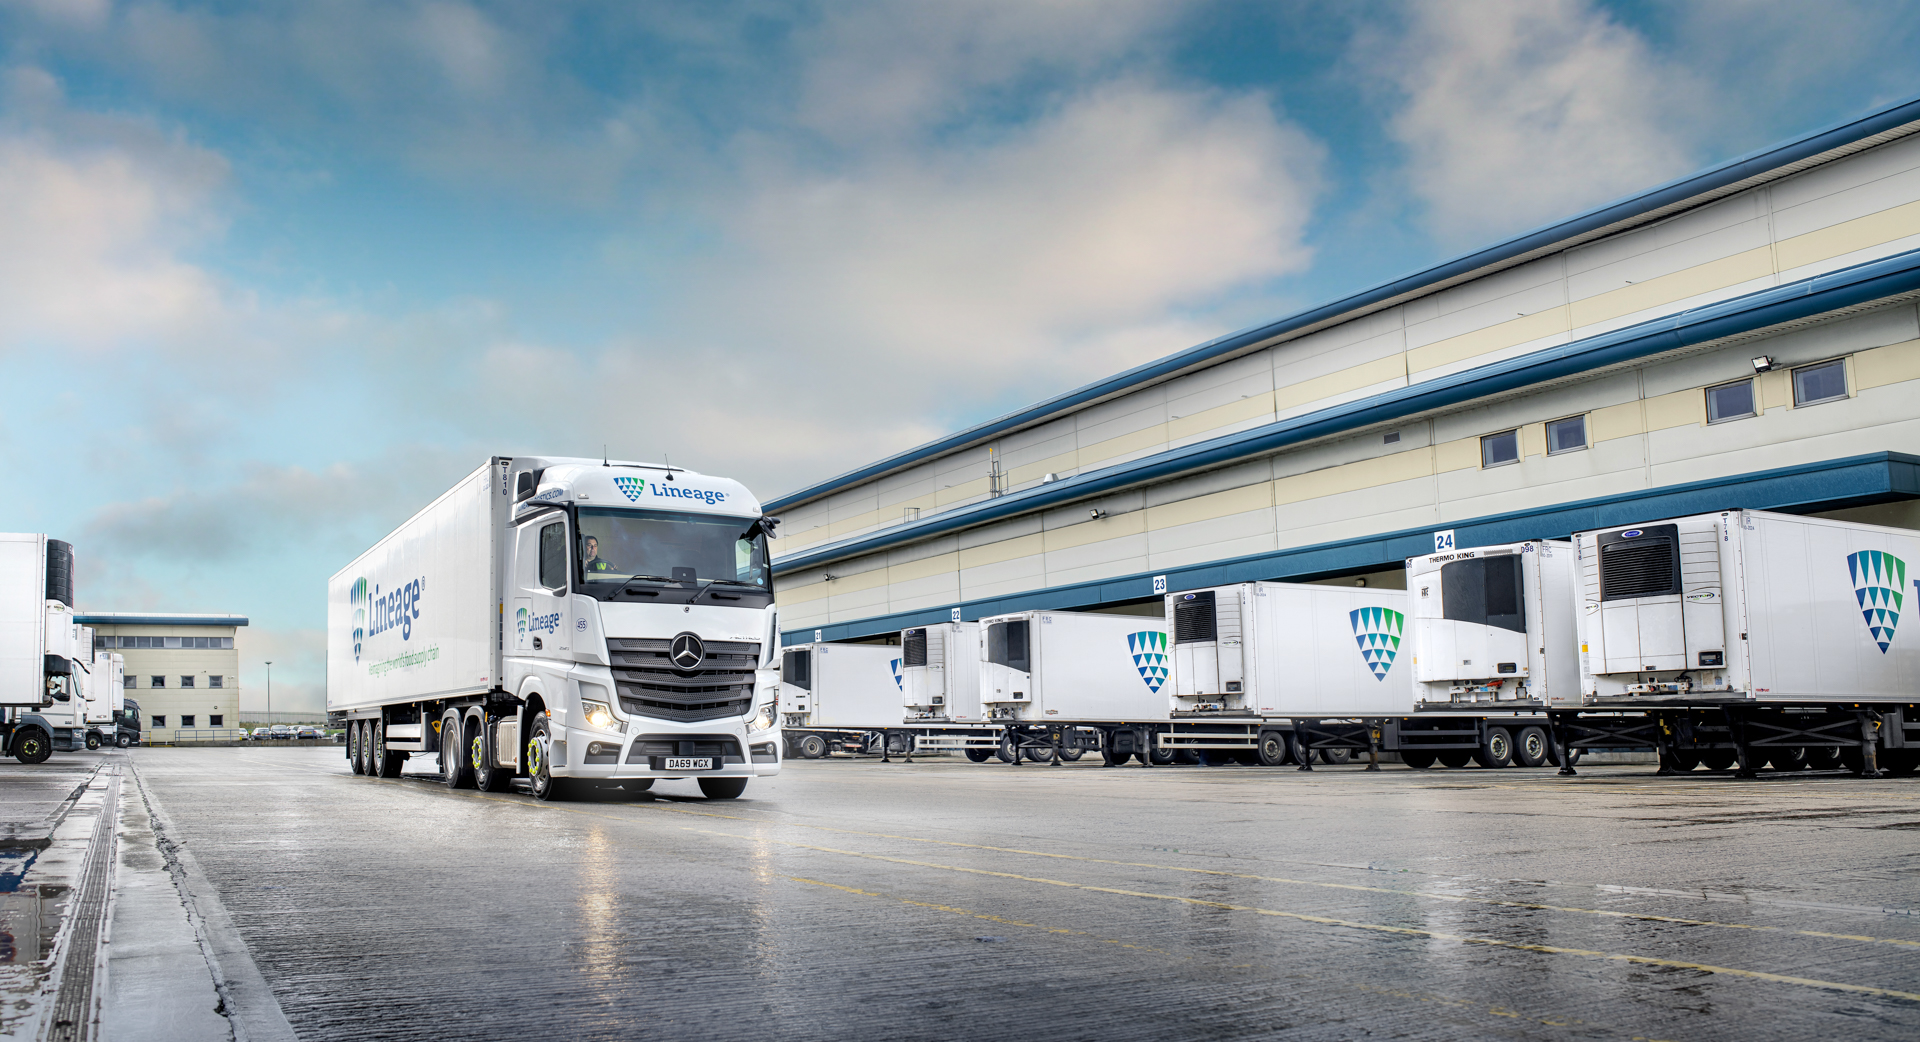 A Lineage truck driving past a fleet of parked Lineage trucks outside a Lineage warehouse.